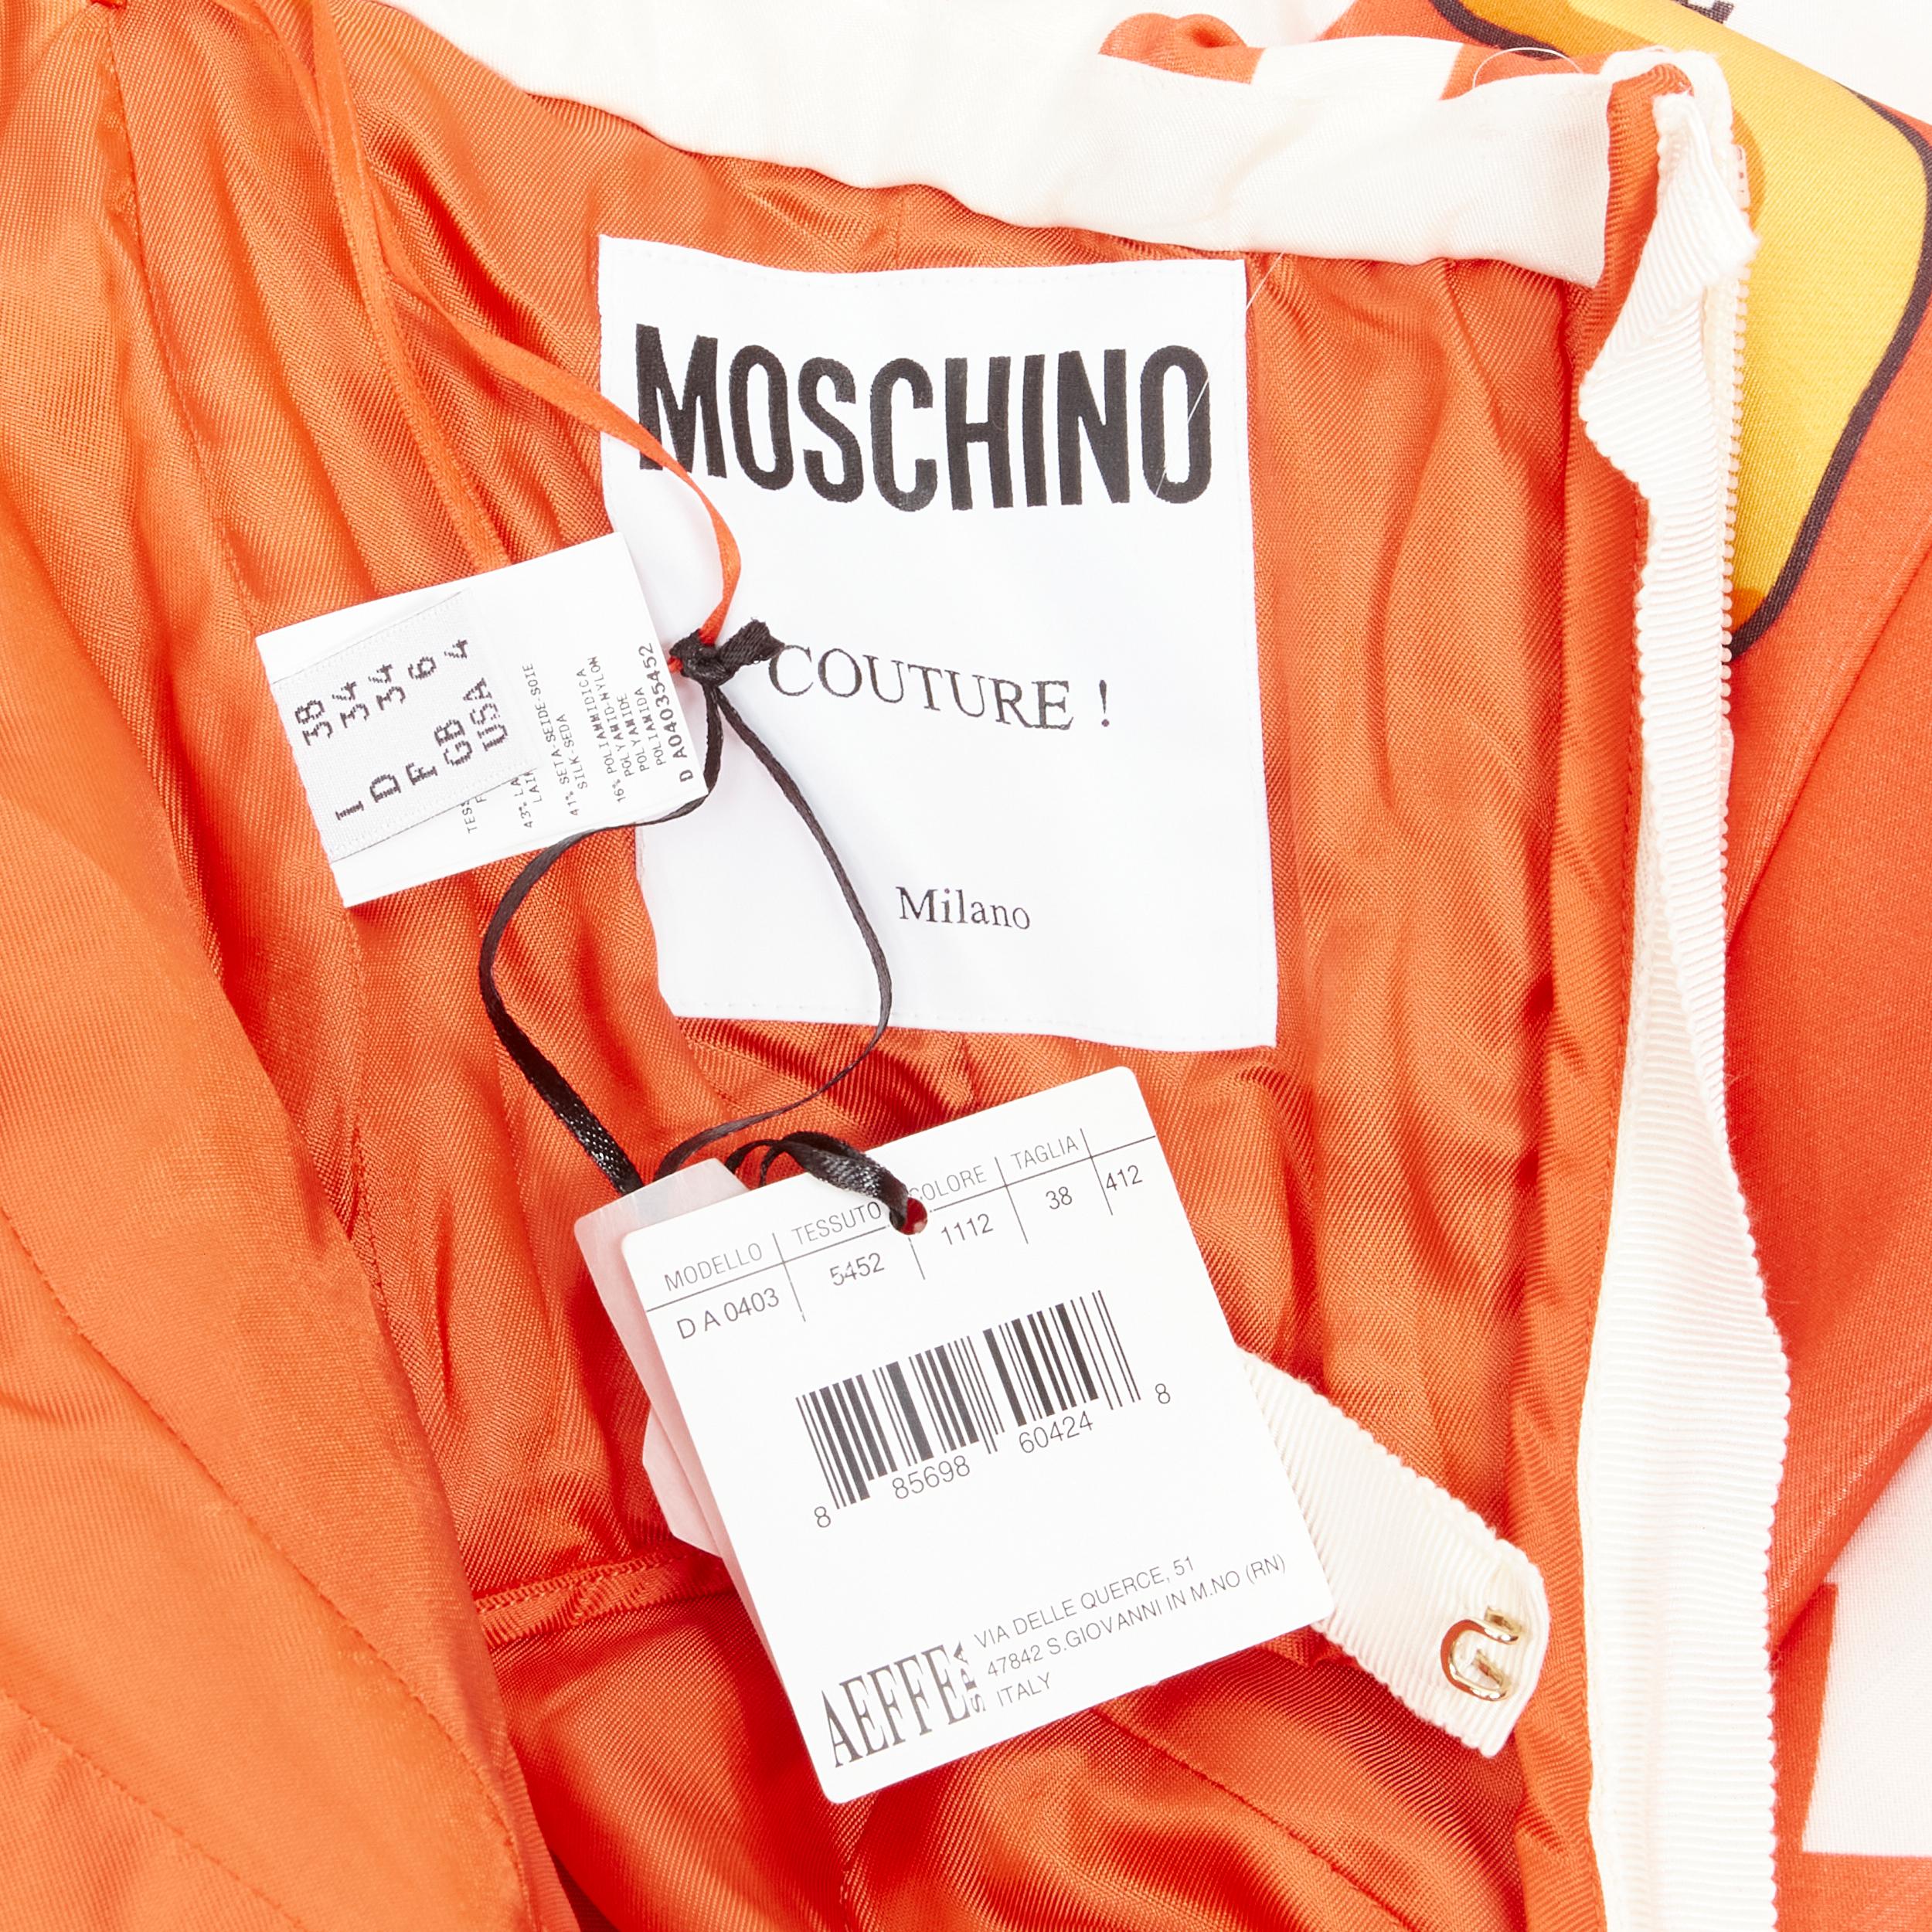 rare MOSCHINO Couture! 2014 Runway orange Cheetos Junk Food print bow gown IT38  For Sale 2